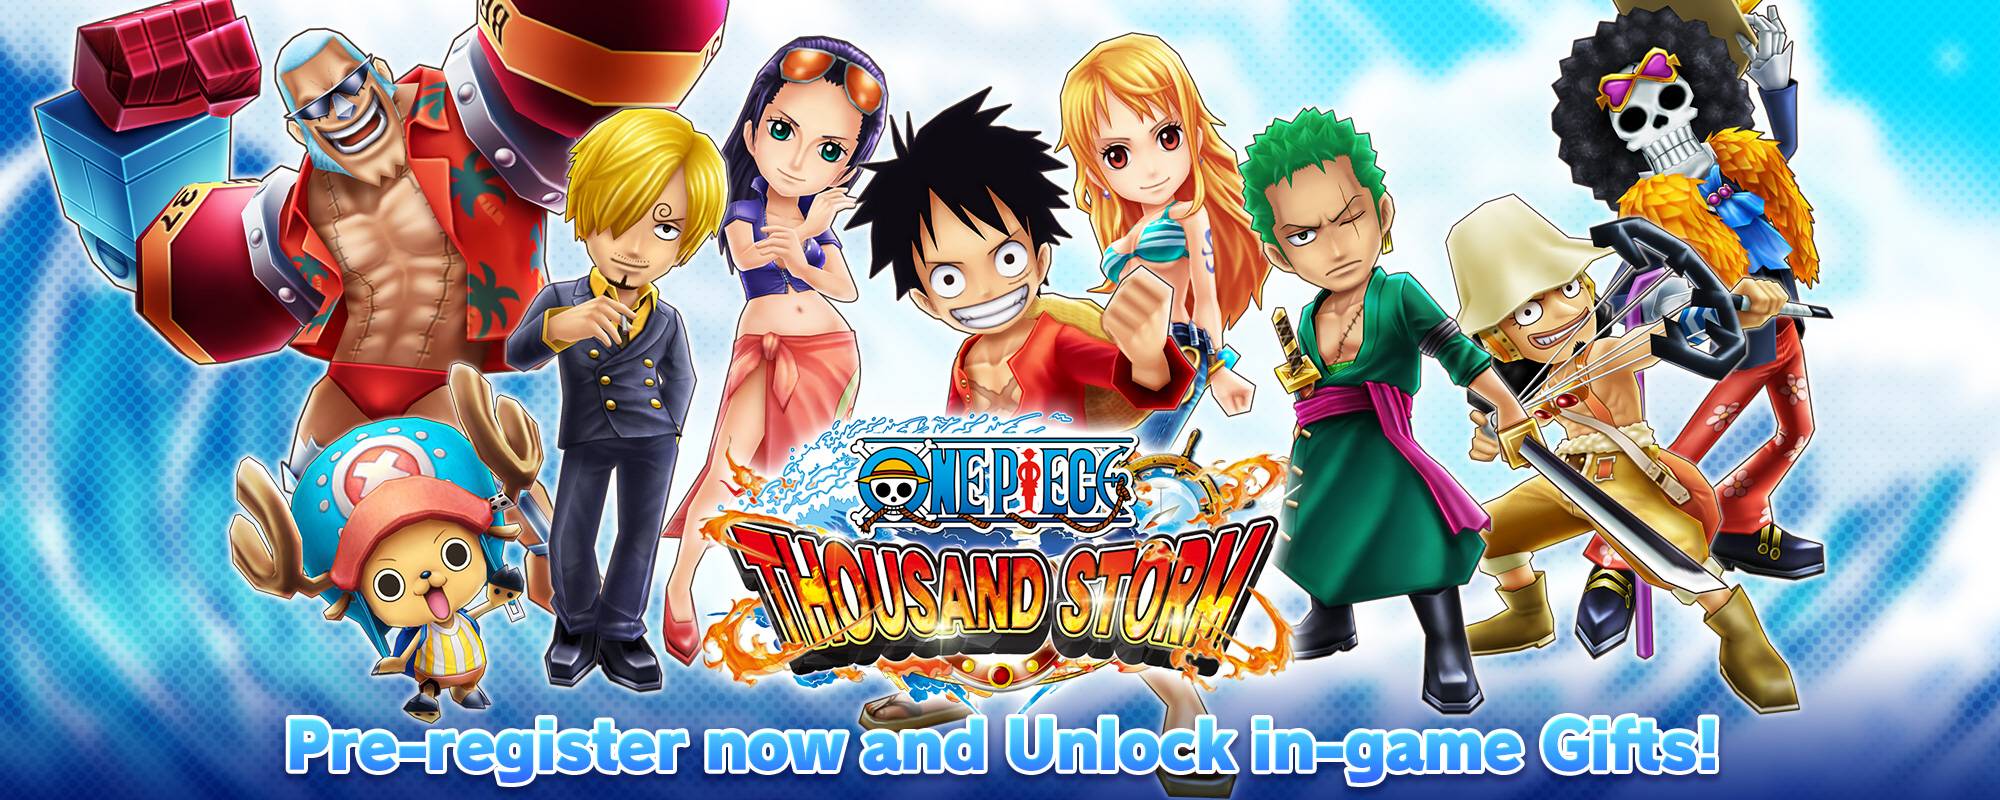 one-piece-thousand-storm-game-by-bandai-namco-now-open-for-pre-registration-android-community